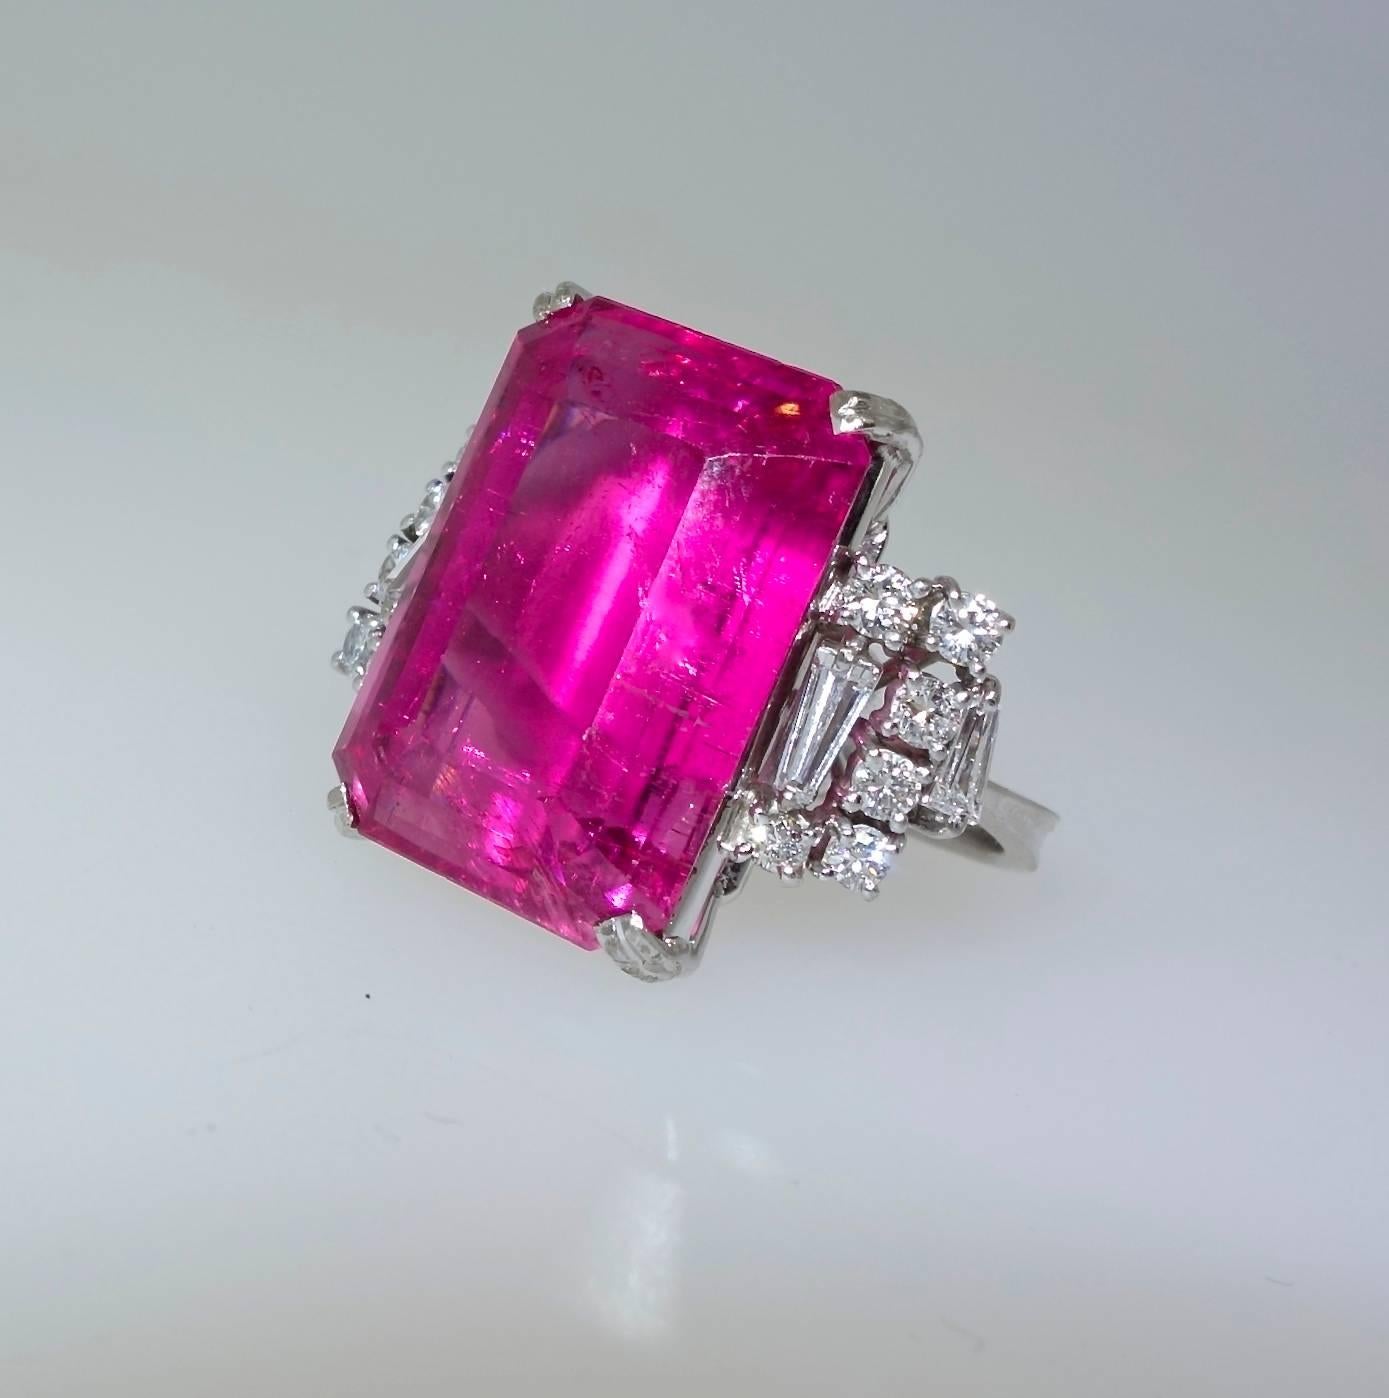 The bright - vivid and robust- pink tourmaline weighs 24.47 cts., and is a bright 